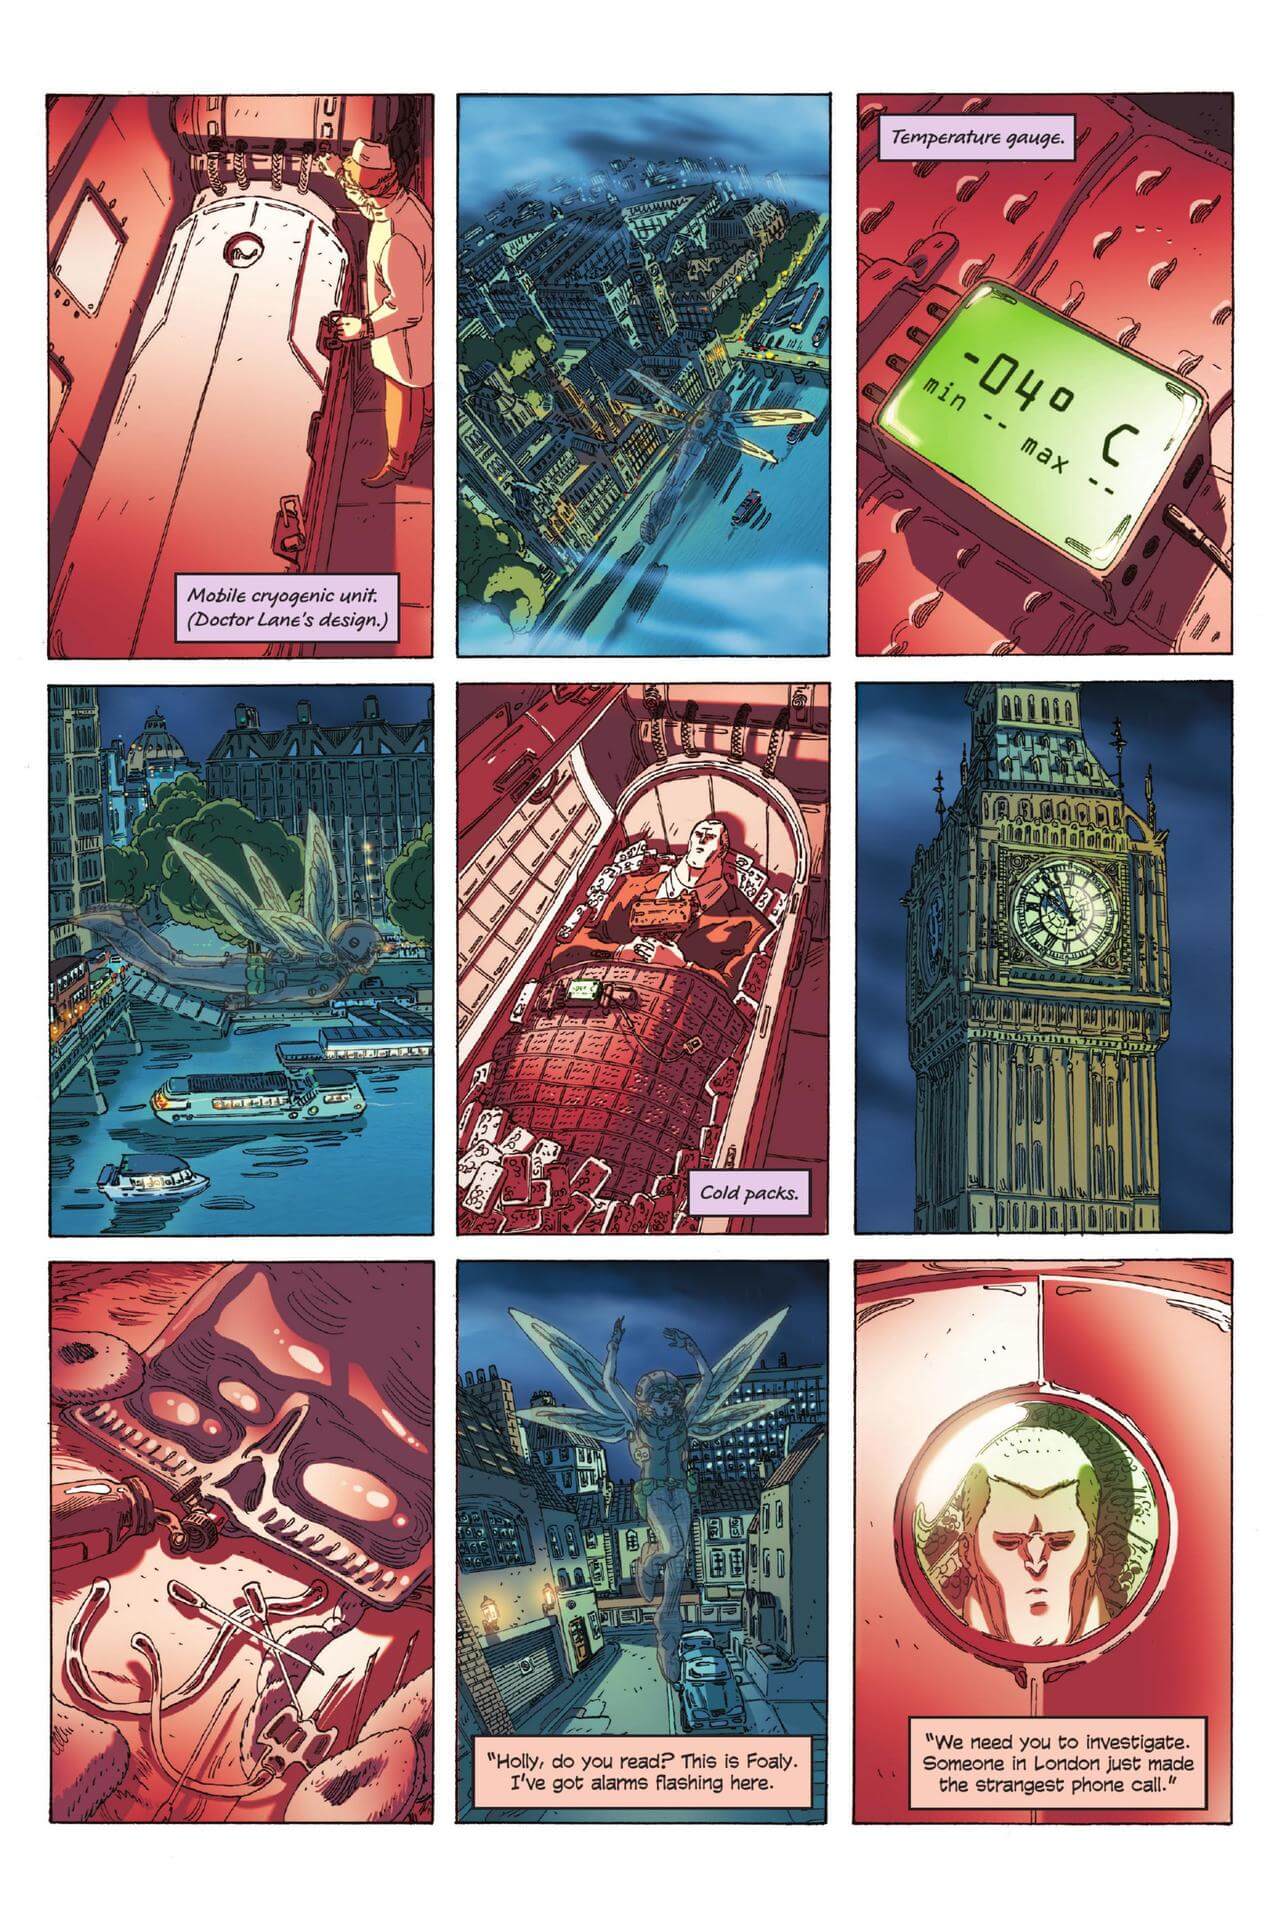 page 30 of artemis fowl eternity code graphic novel